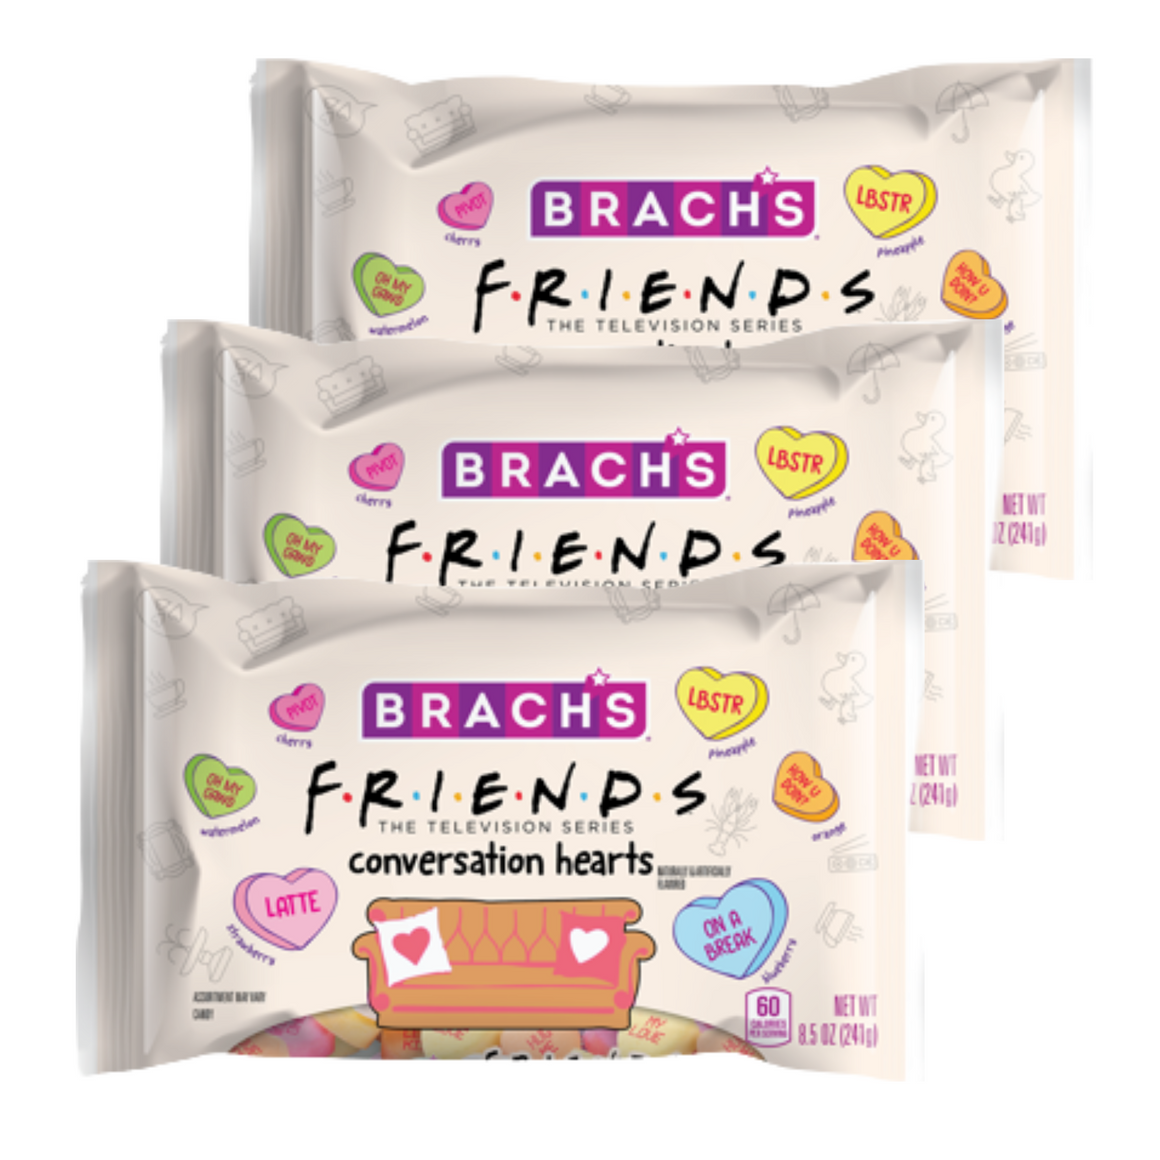 All City Candy Brach's FRIENDS Conversation Hearts 8.5 oz. Bag For fresh candy and great service visit www.allcitycandy.com